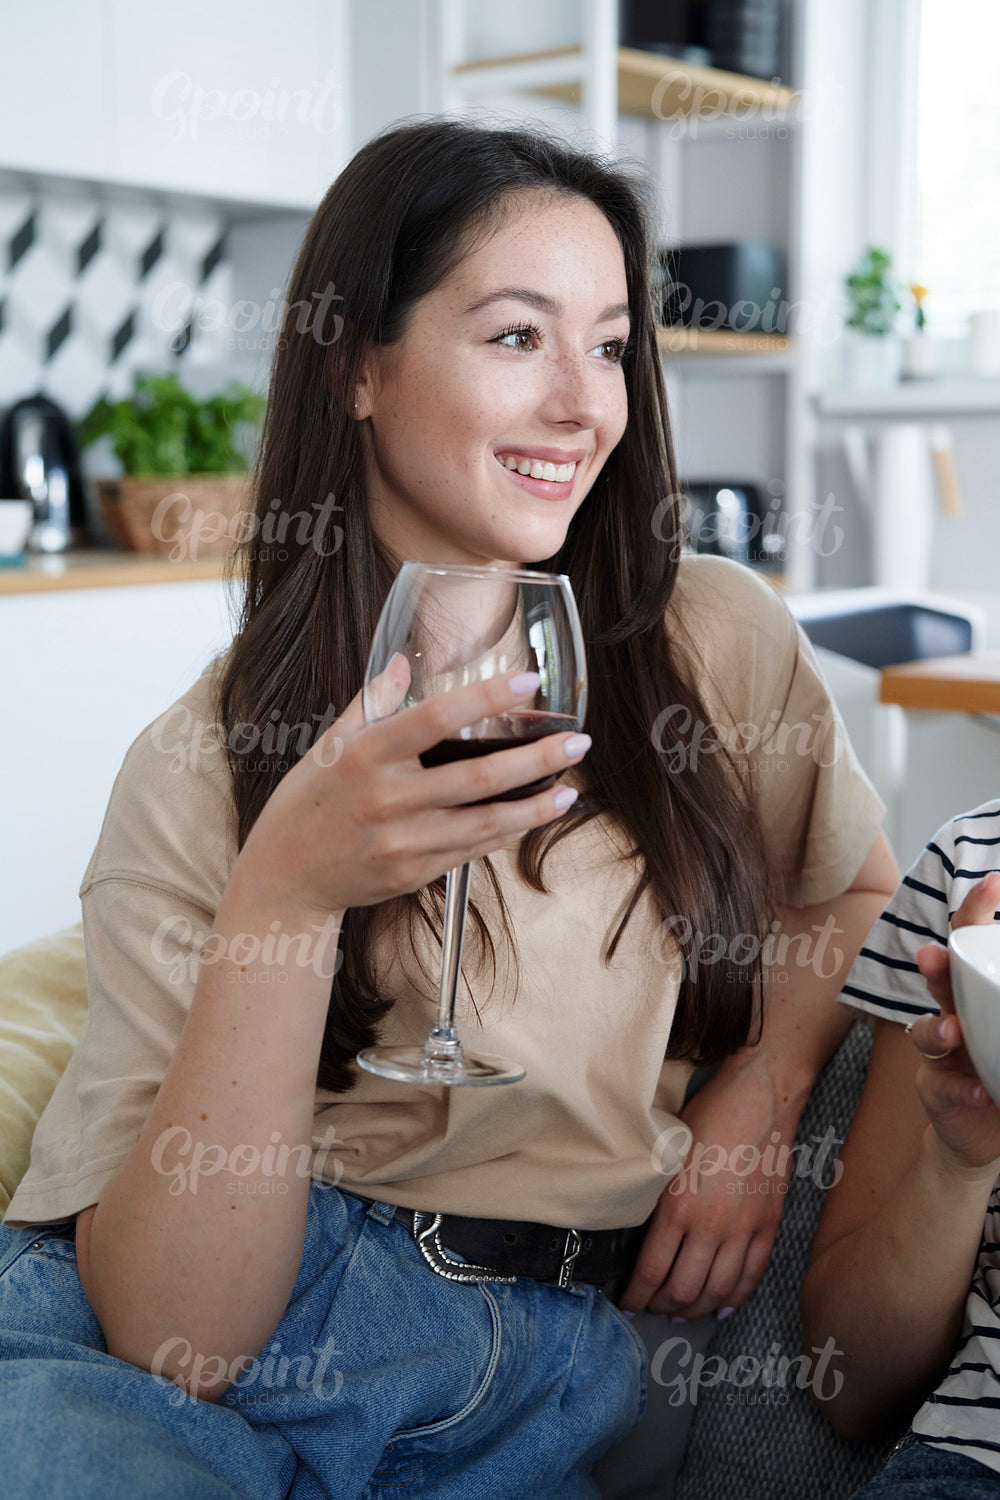 Smiling woman with a glass of wine in hand